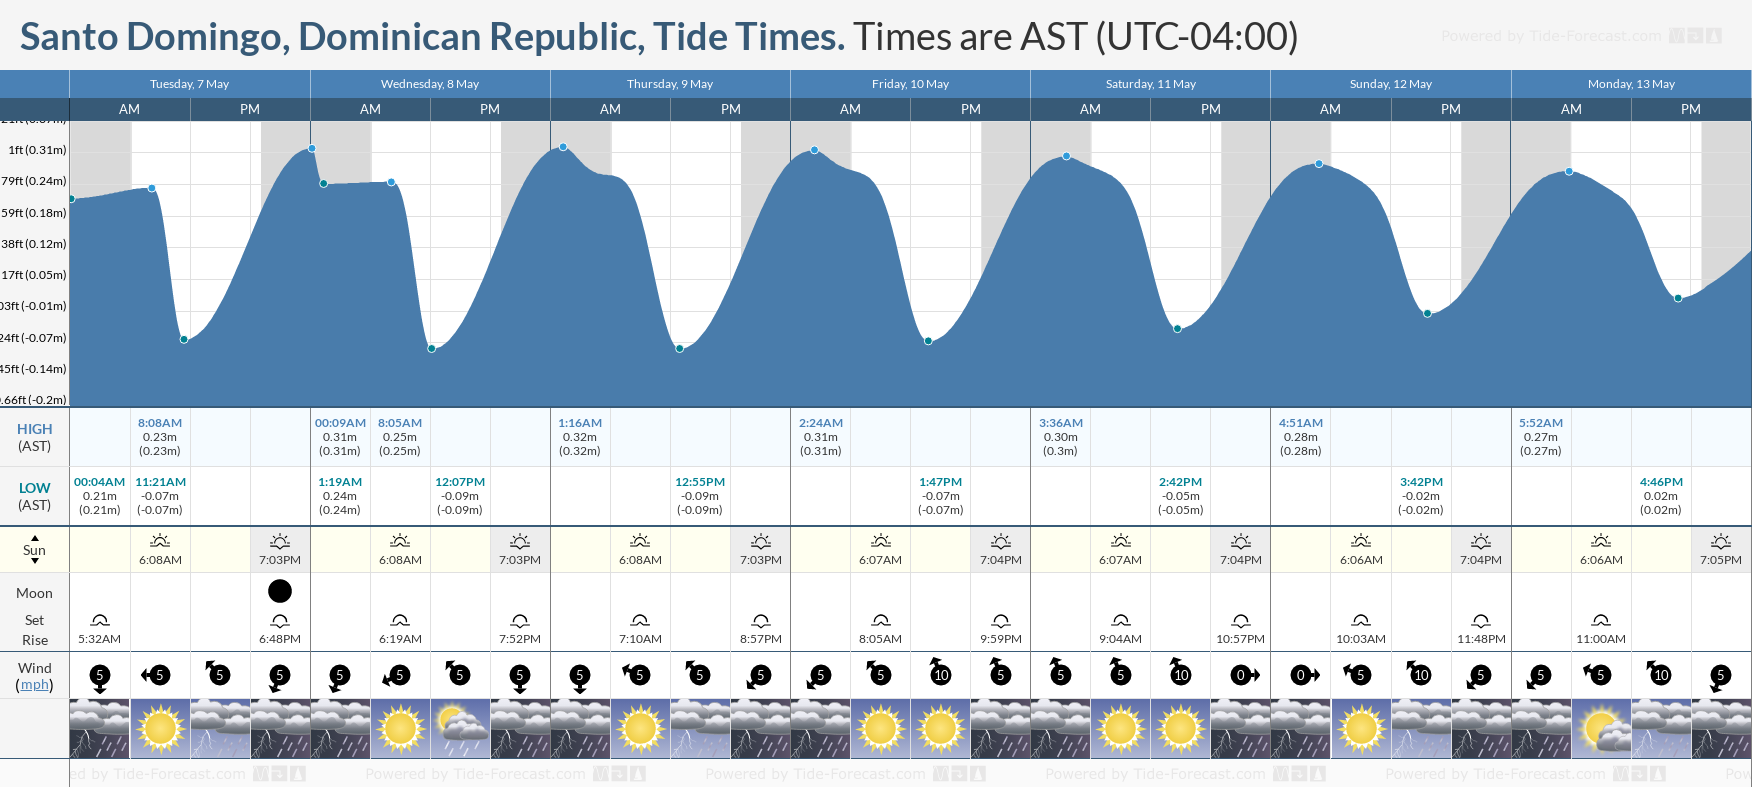 Santo Domingo, Dominican Republic Tide Chart including high and low tide tide times for the next 7 days